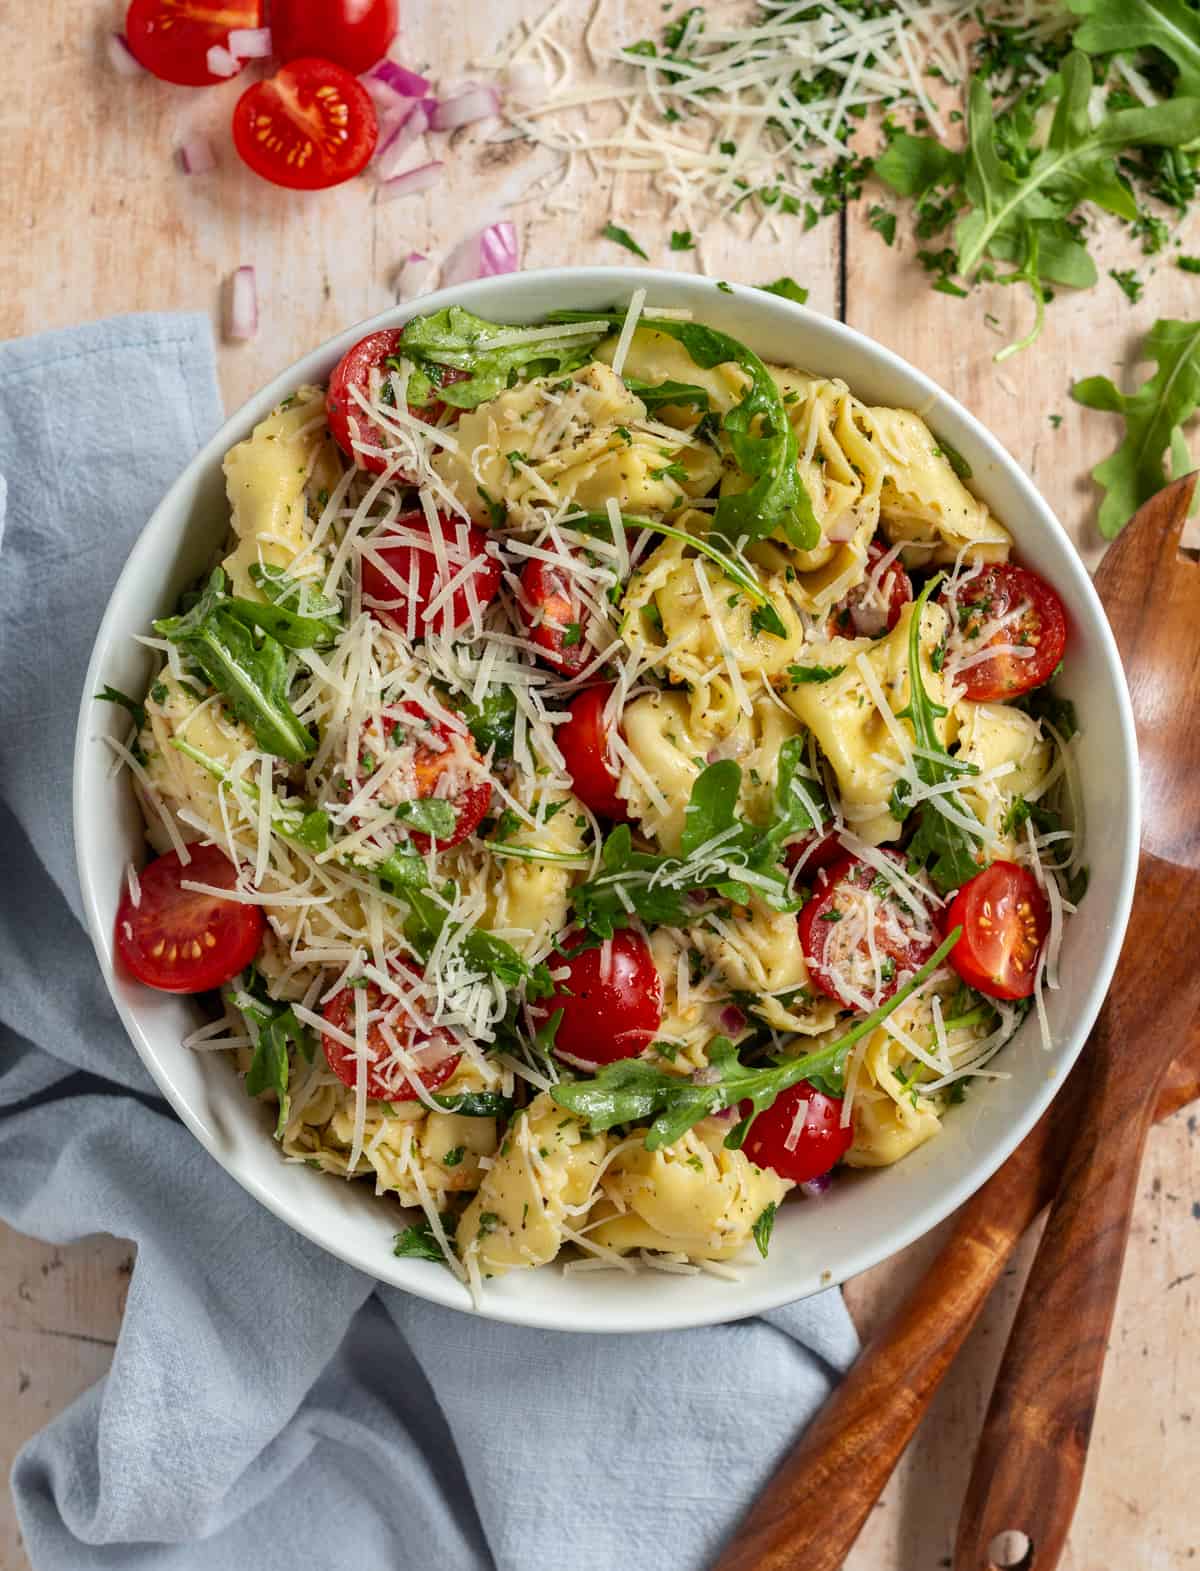 Summer Tortellini Salad topped with cherry tomatoes, arugula, and parmesan cheese. In a white bowl, on a blue napkin, with wooden serving spoons and various ingredients in the background.